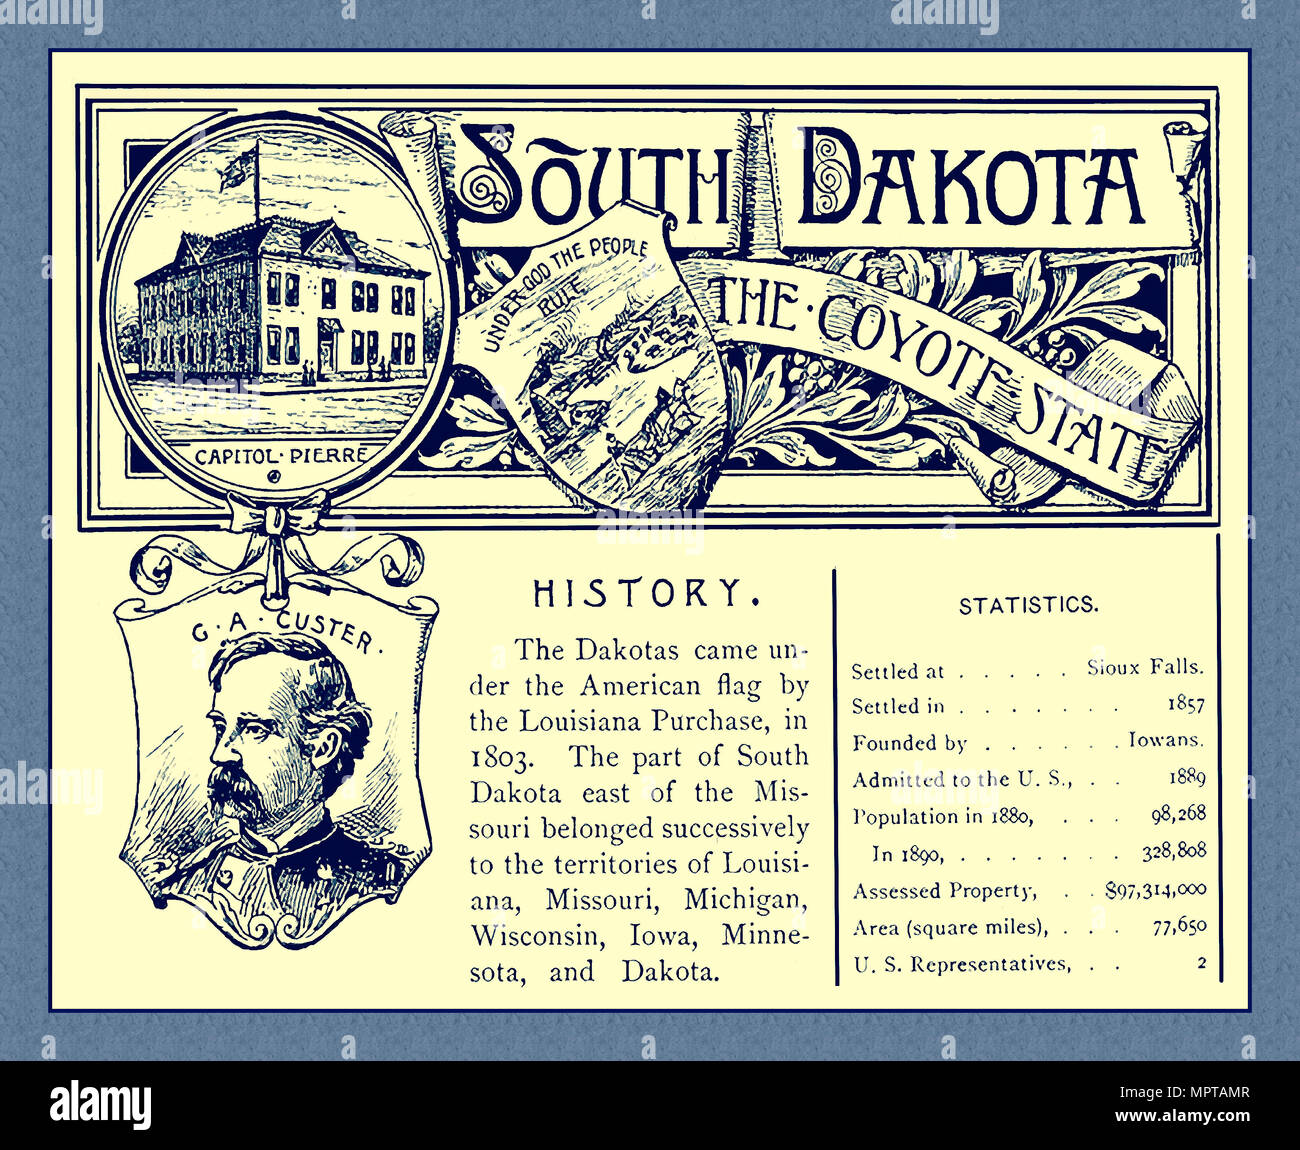 South Dakota State page from 1891 Guidebook. Stock Photo